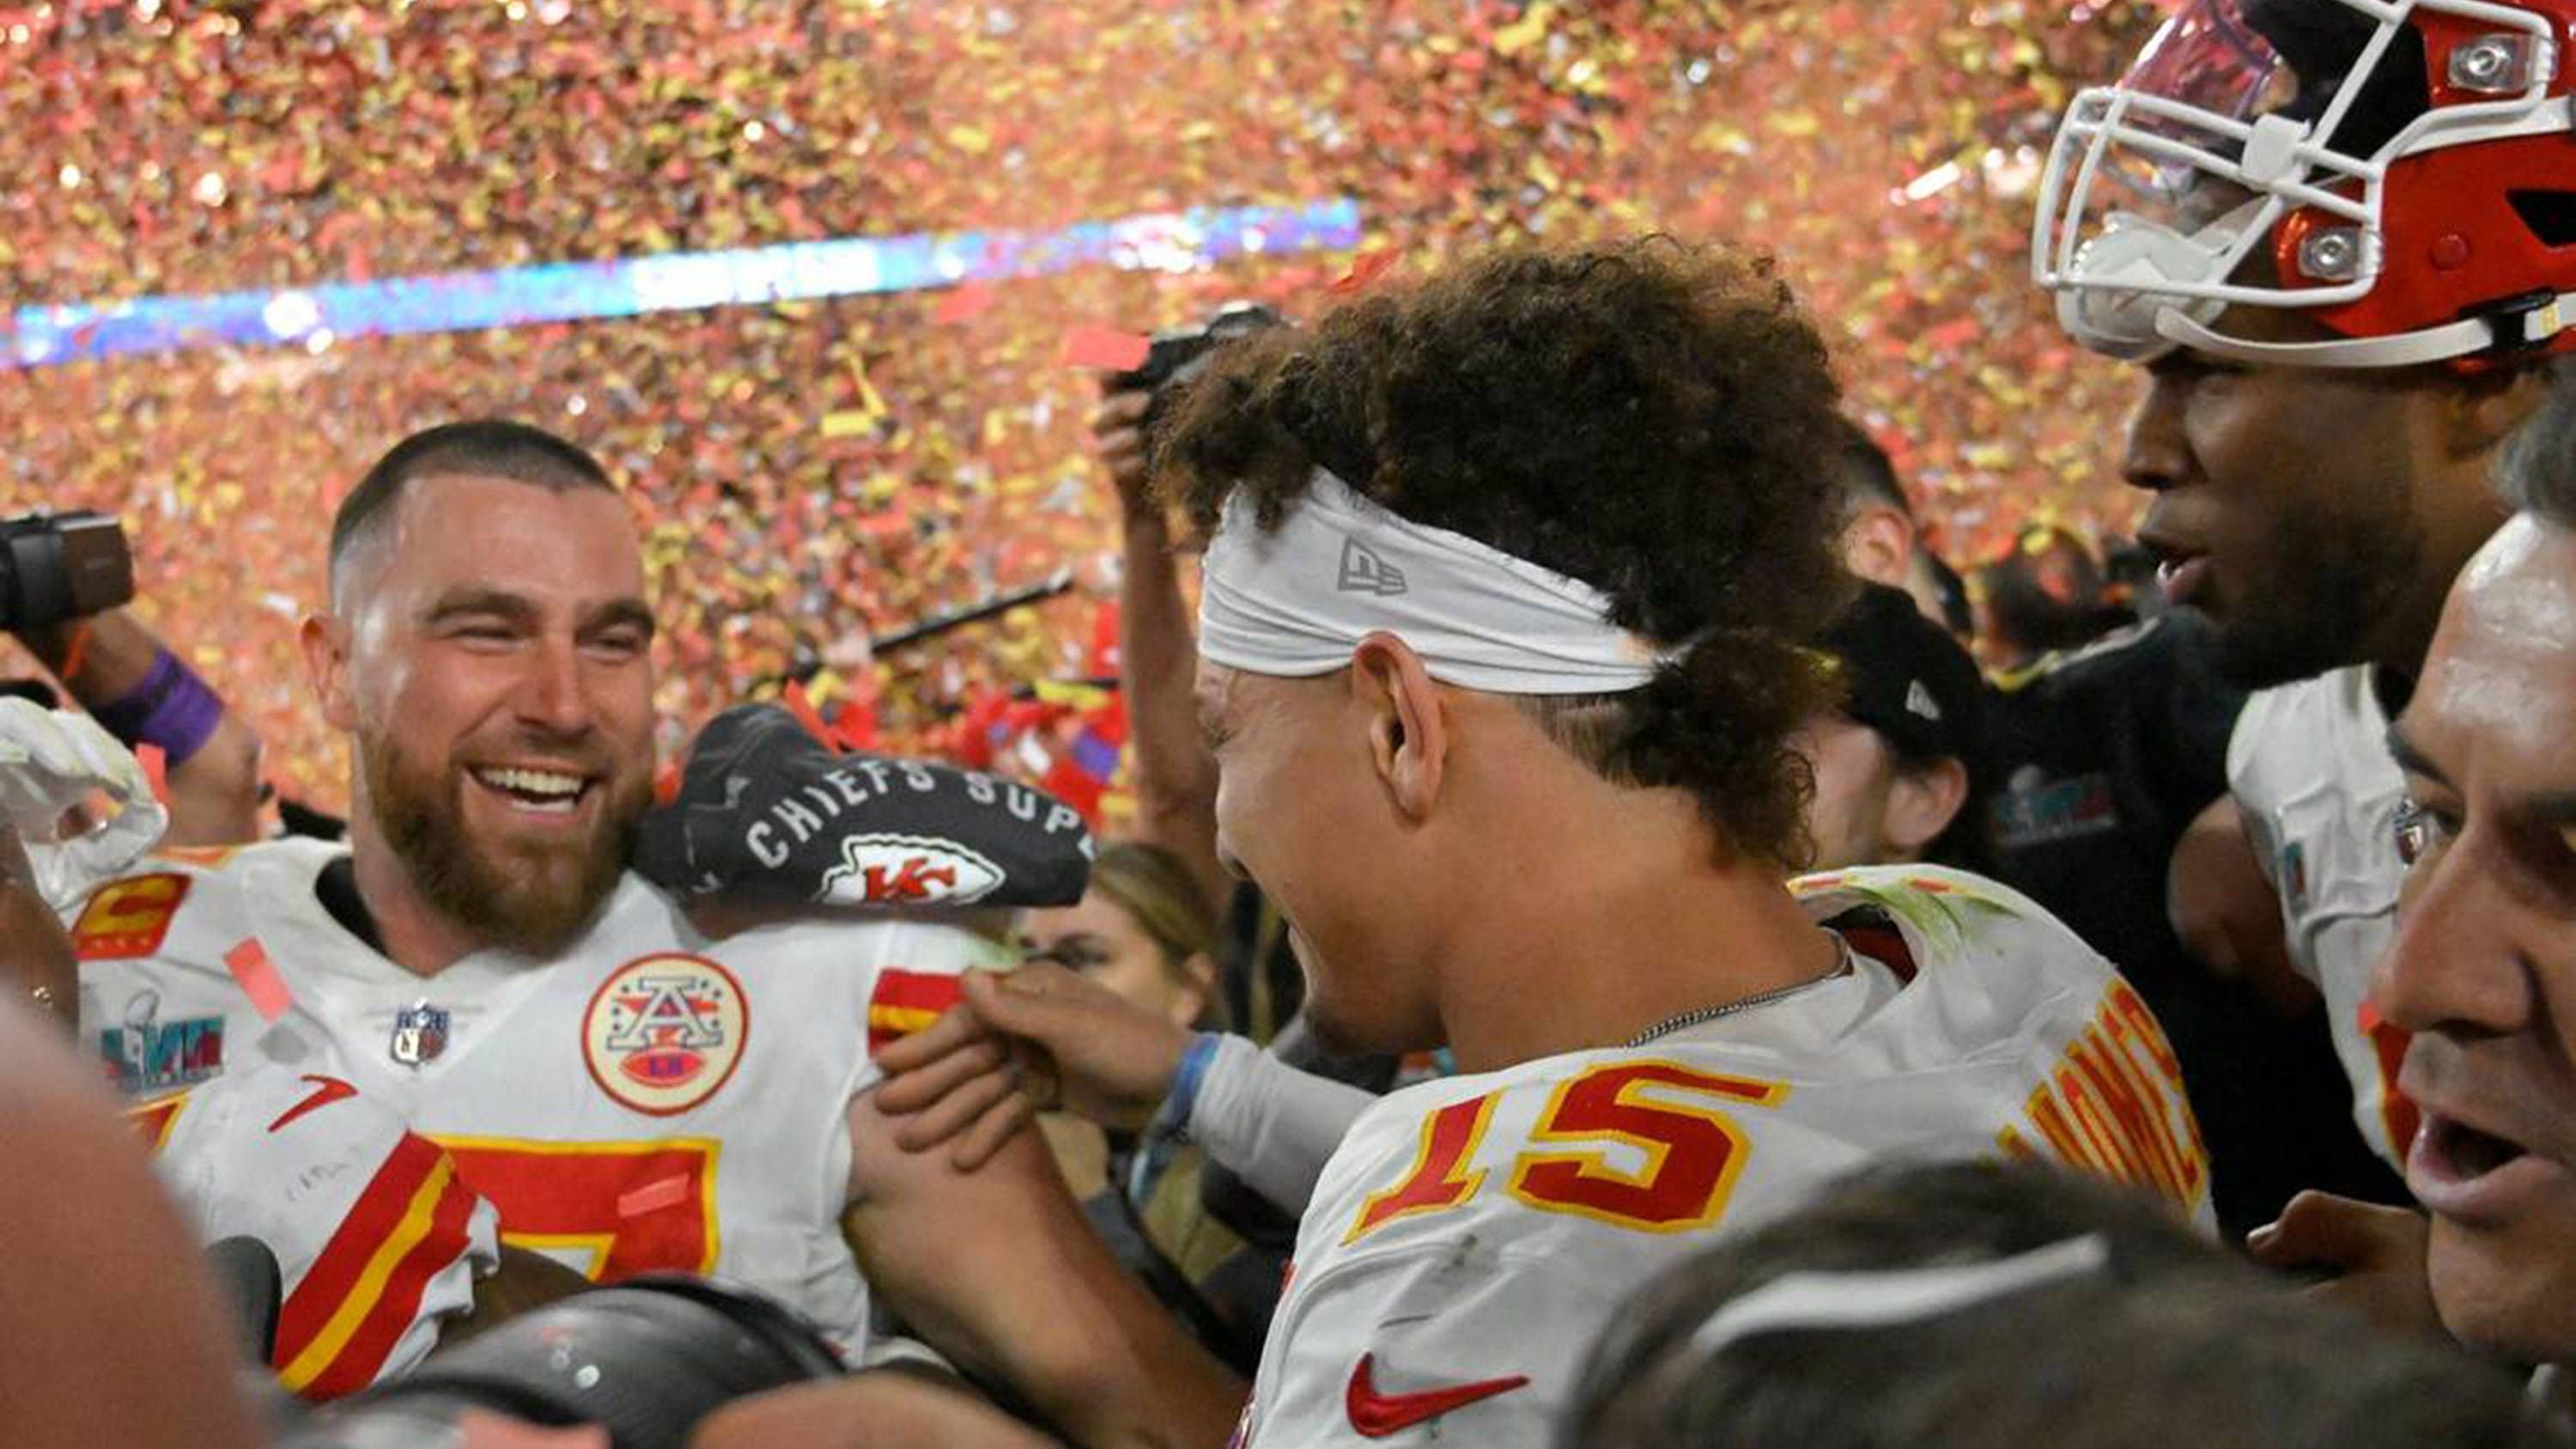 <strong>2023 - Kansas City Chiefs</strong><br>Endstand: 38:35 gegen die Philadelphia Eagles<br>Coach: Andy Reid<br>MVP: Patrick Mahomes